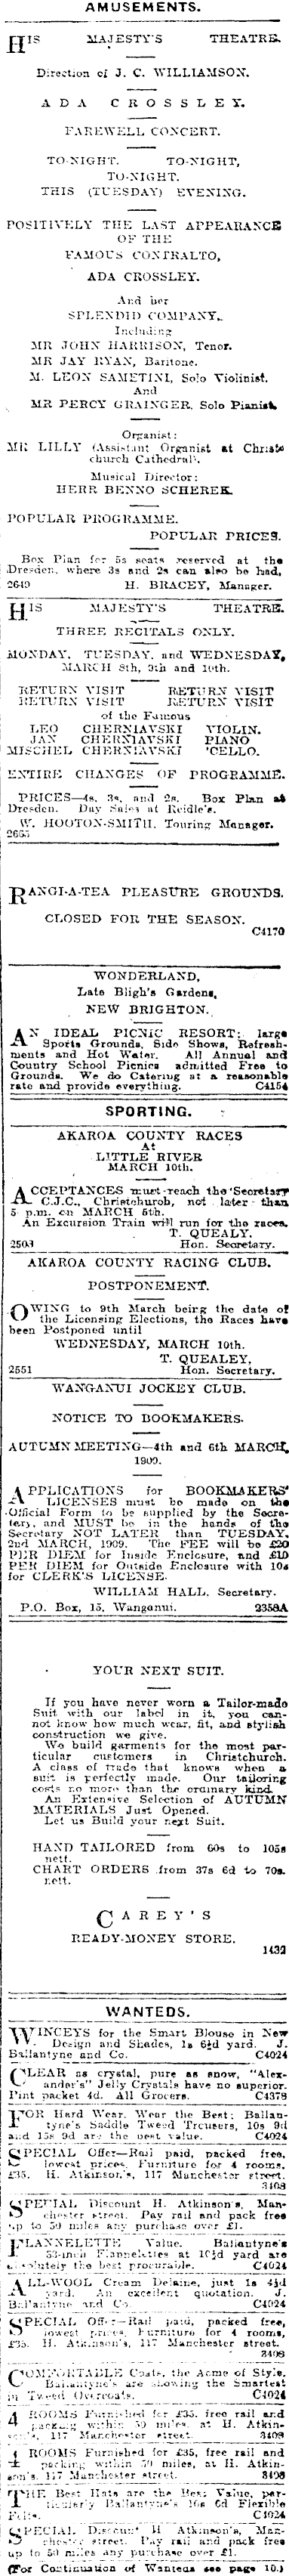 Papers Past Newspapers Press 2 March 1909 Page 1 Advertisements Column 7